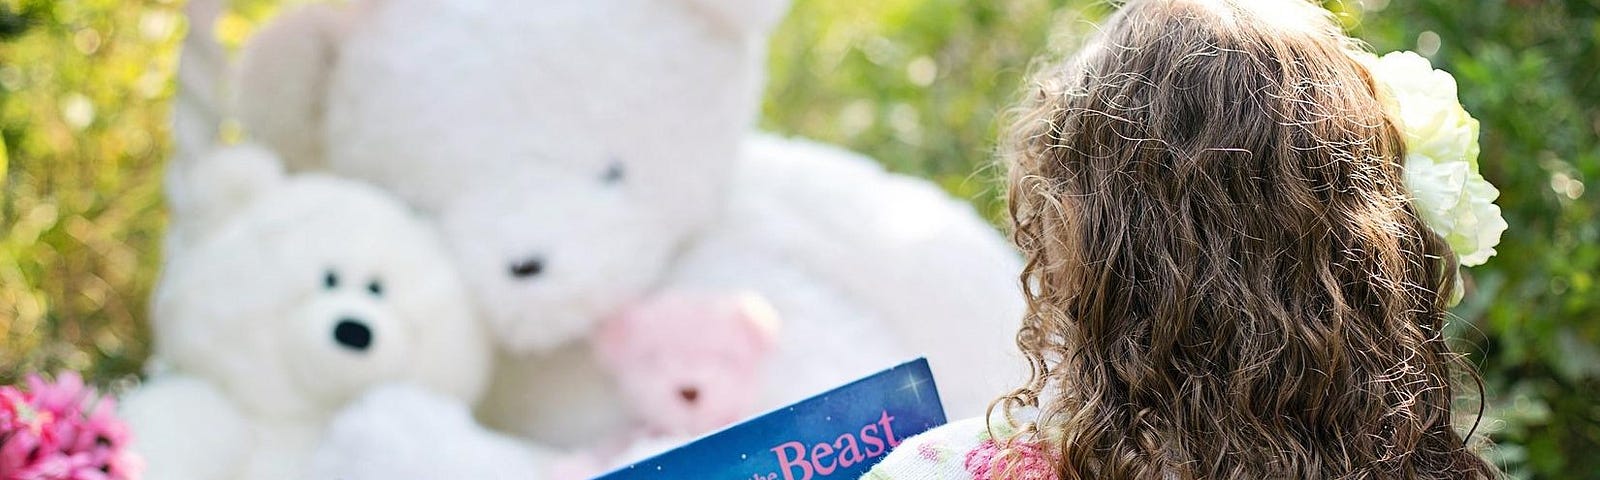 A photograph of a little girl, with her back facing so you can see her long curly locks of blond hair. She is reading a book to three stuffed fluffy bears.